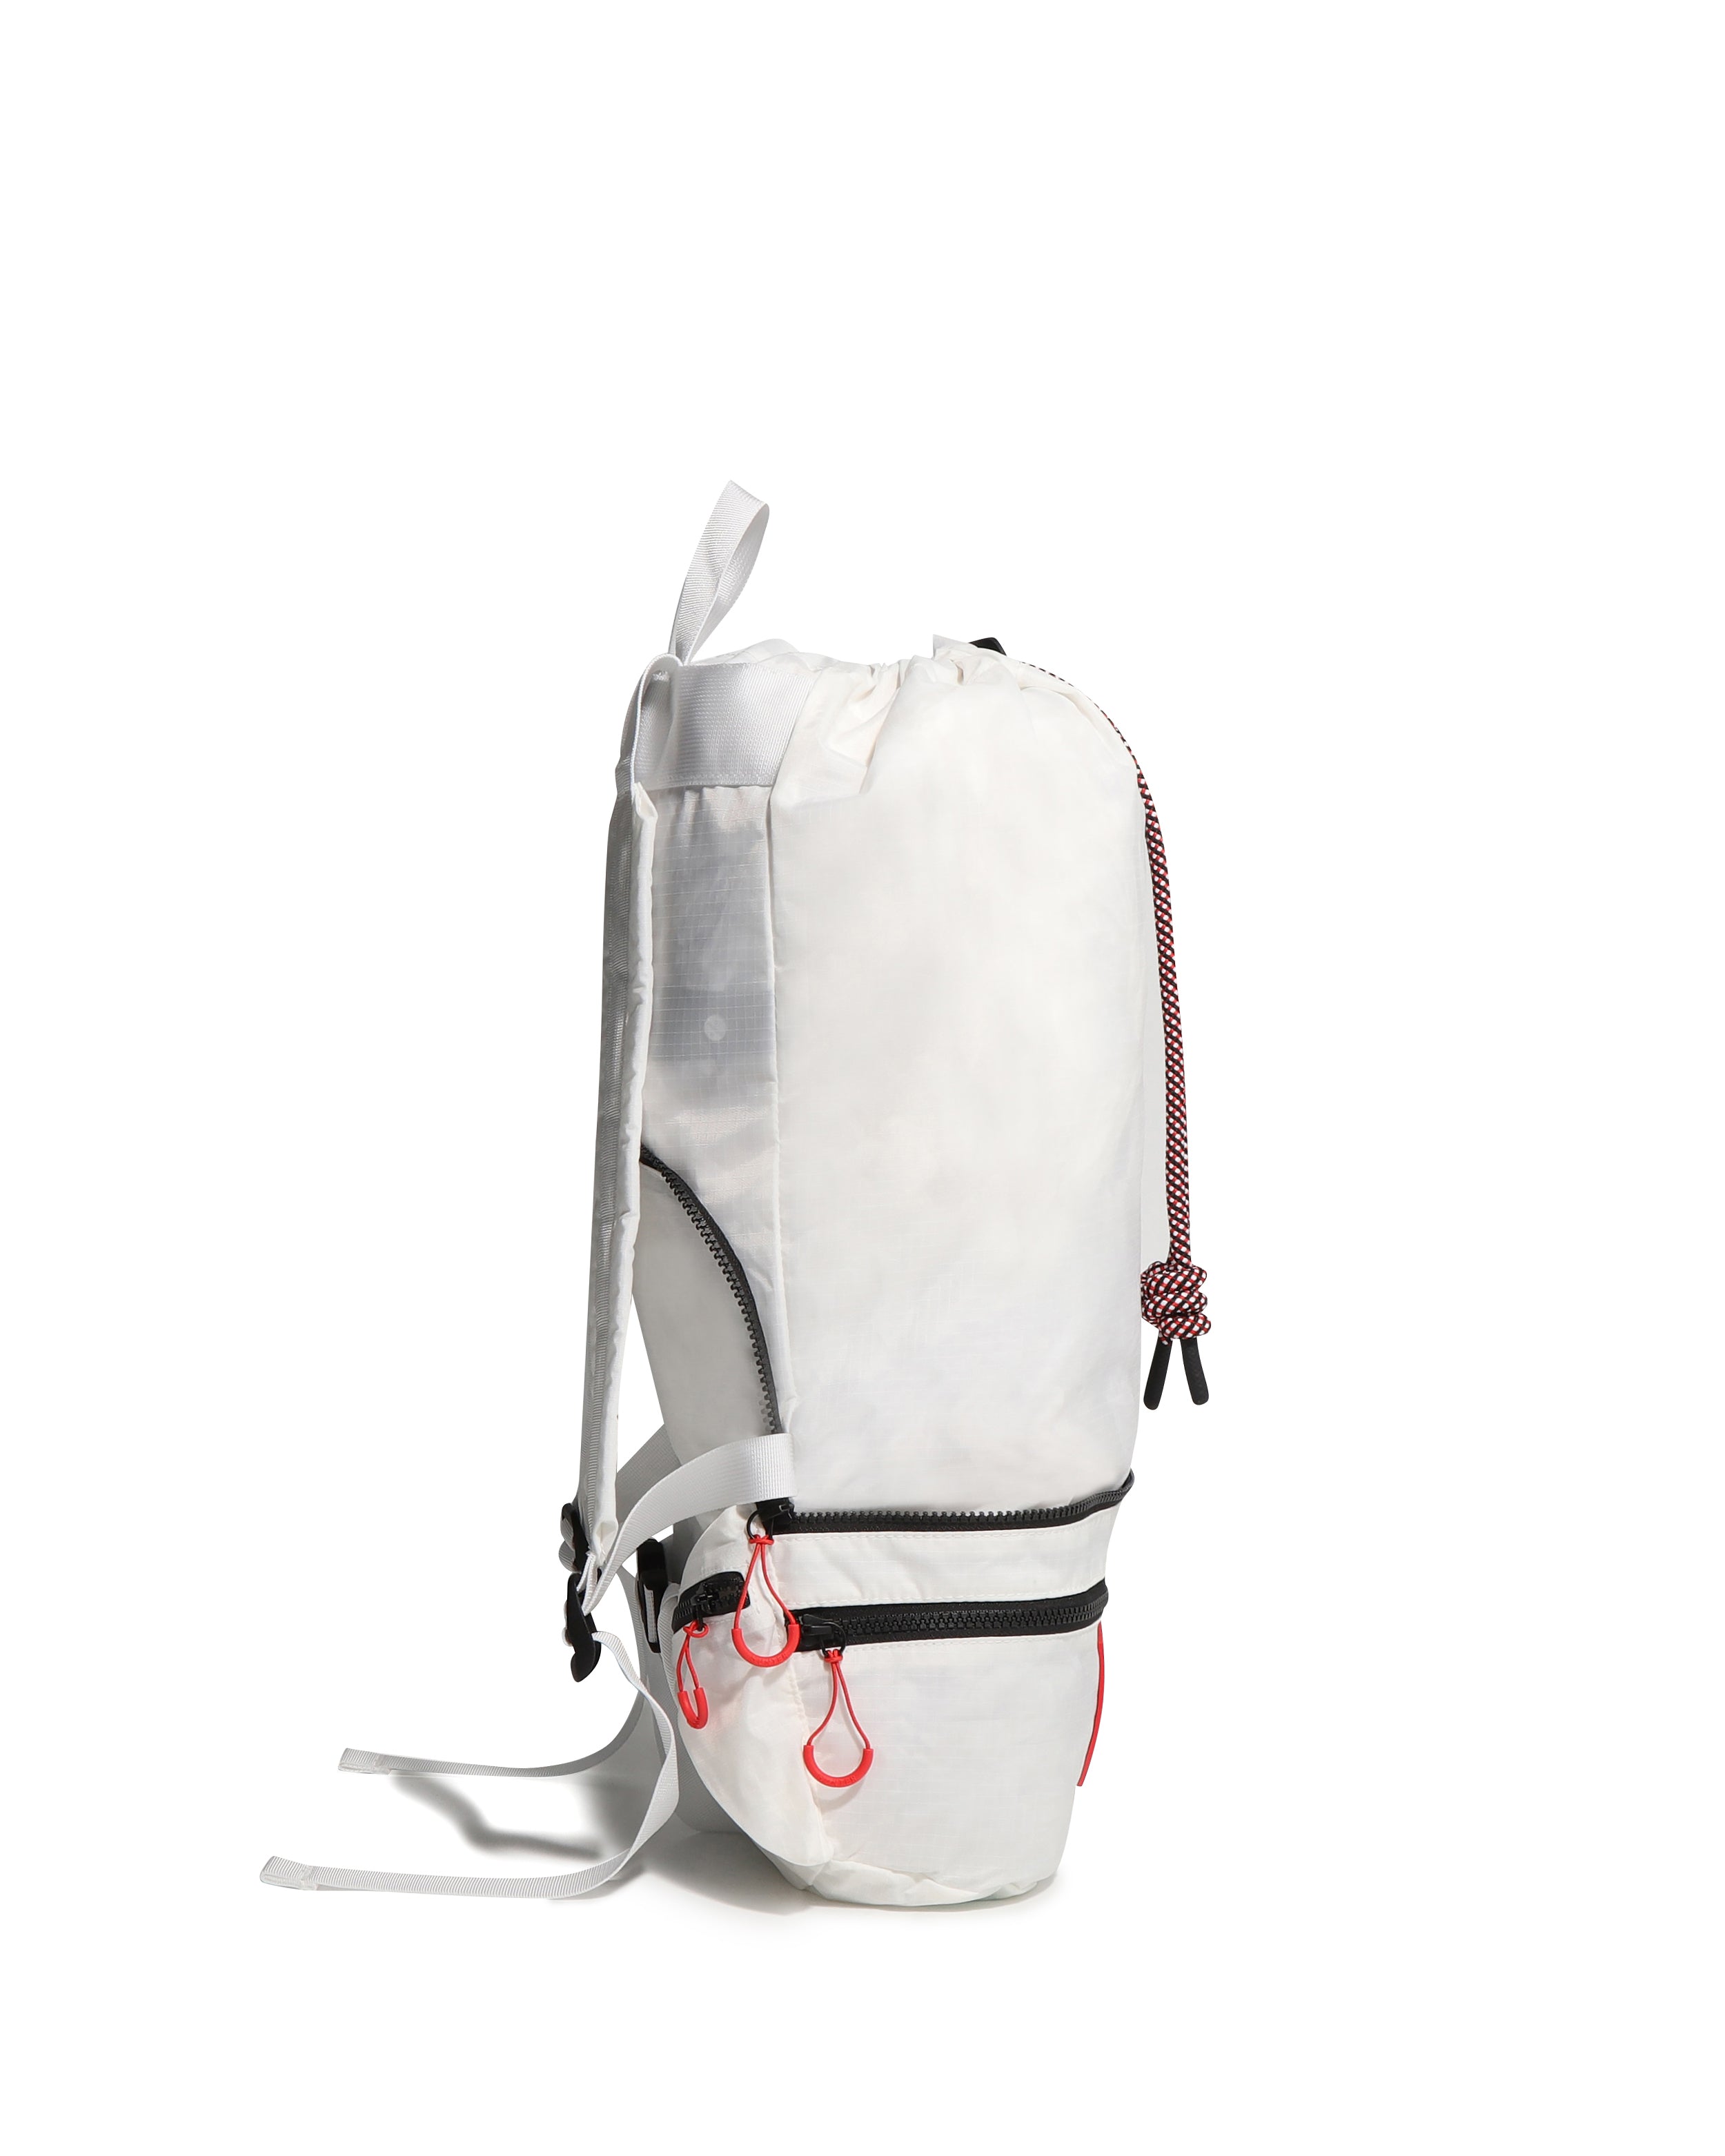 Travel Ripstop Recycled Nylon 2Way Backpack - White/Red Box Logo